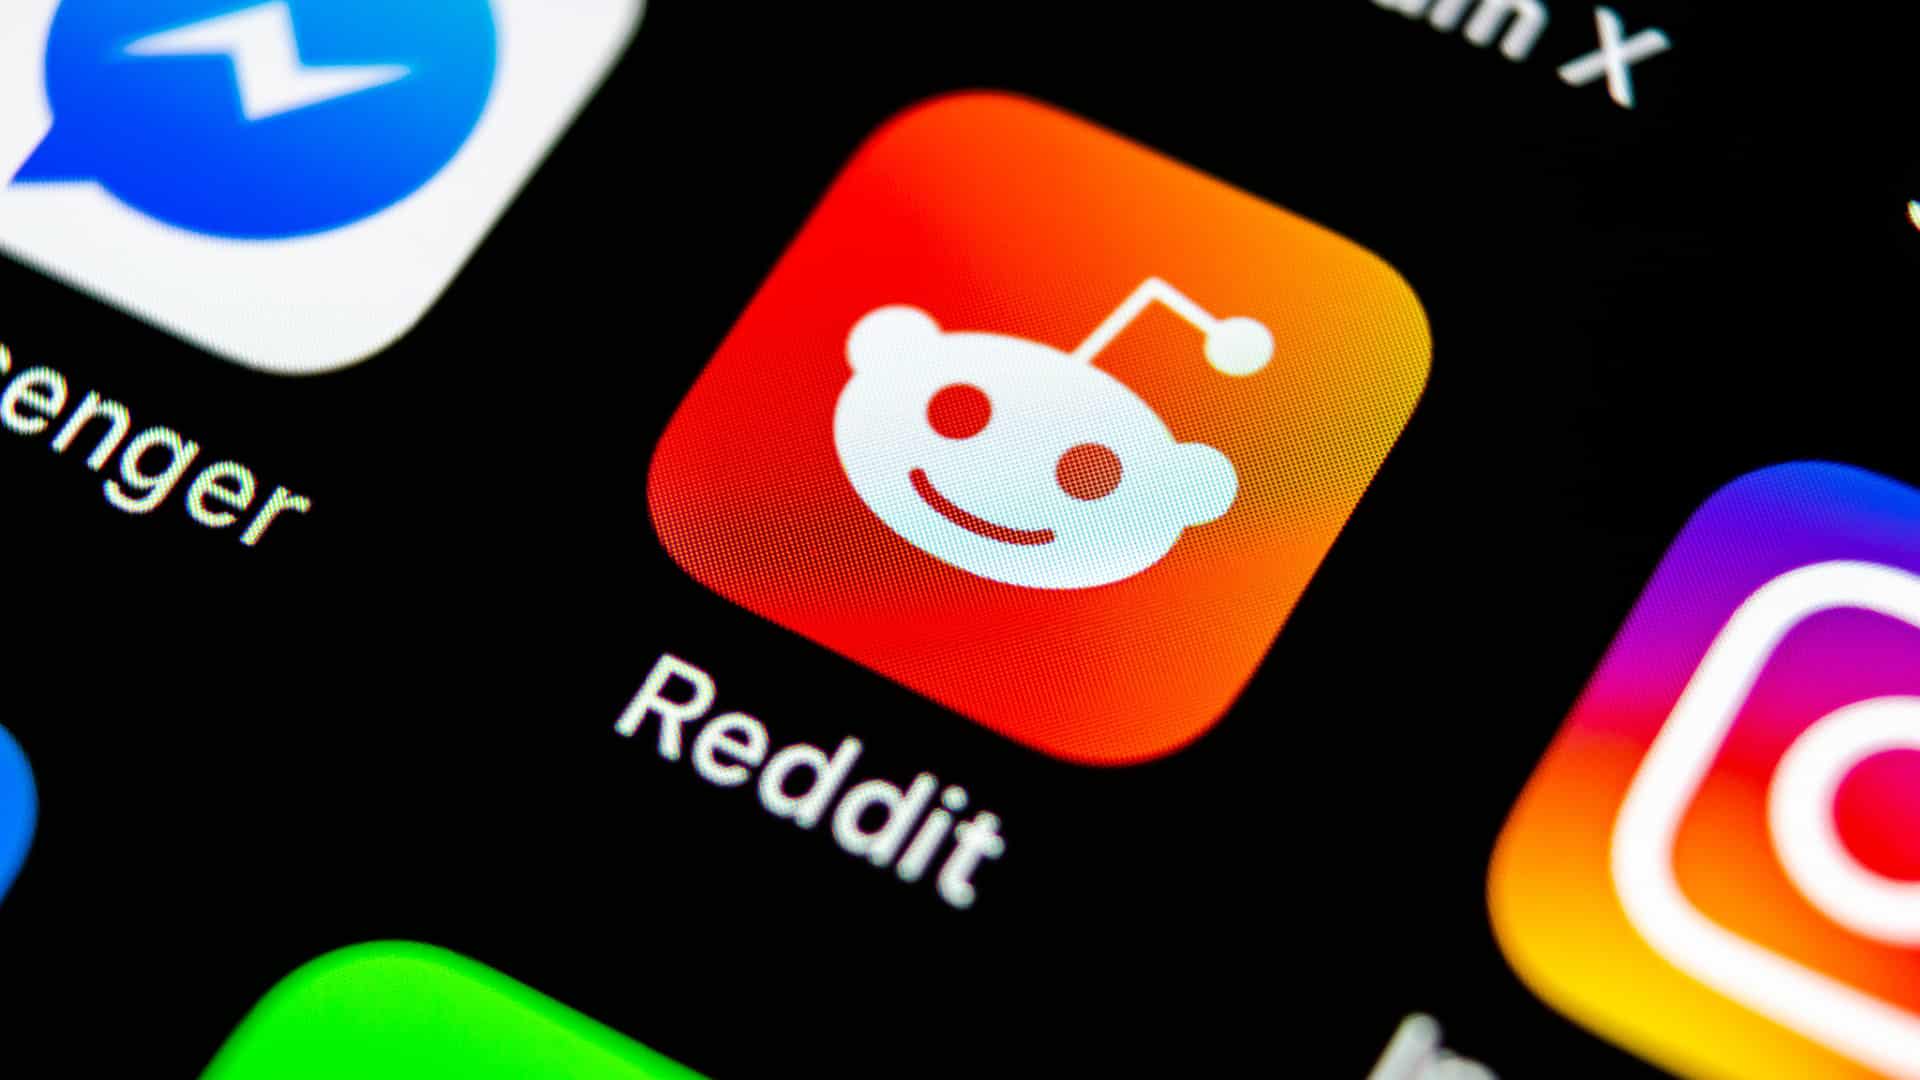 Reddit launches first-party measurement tools